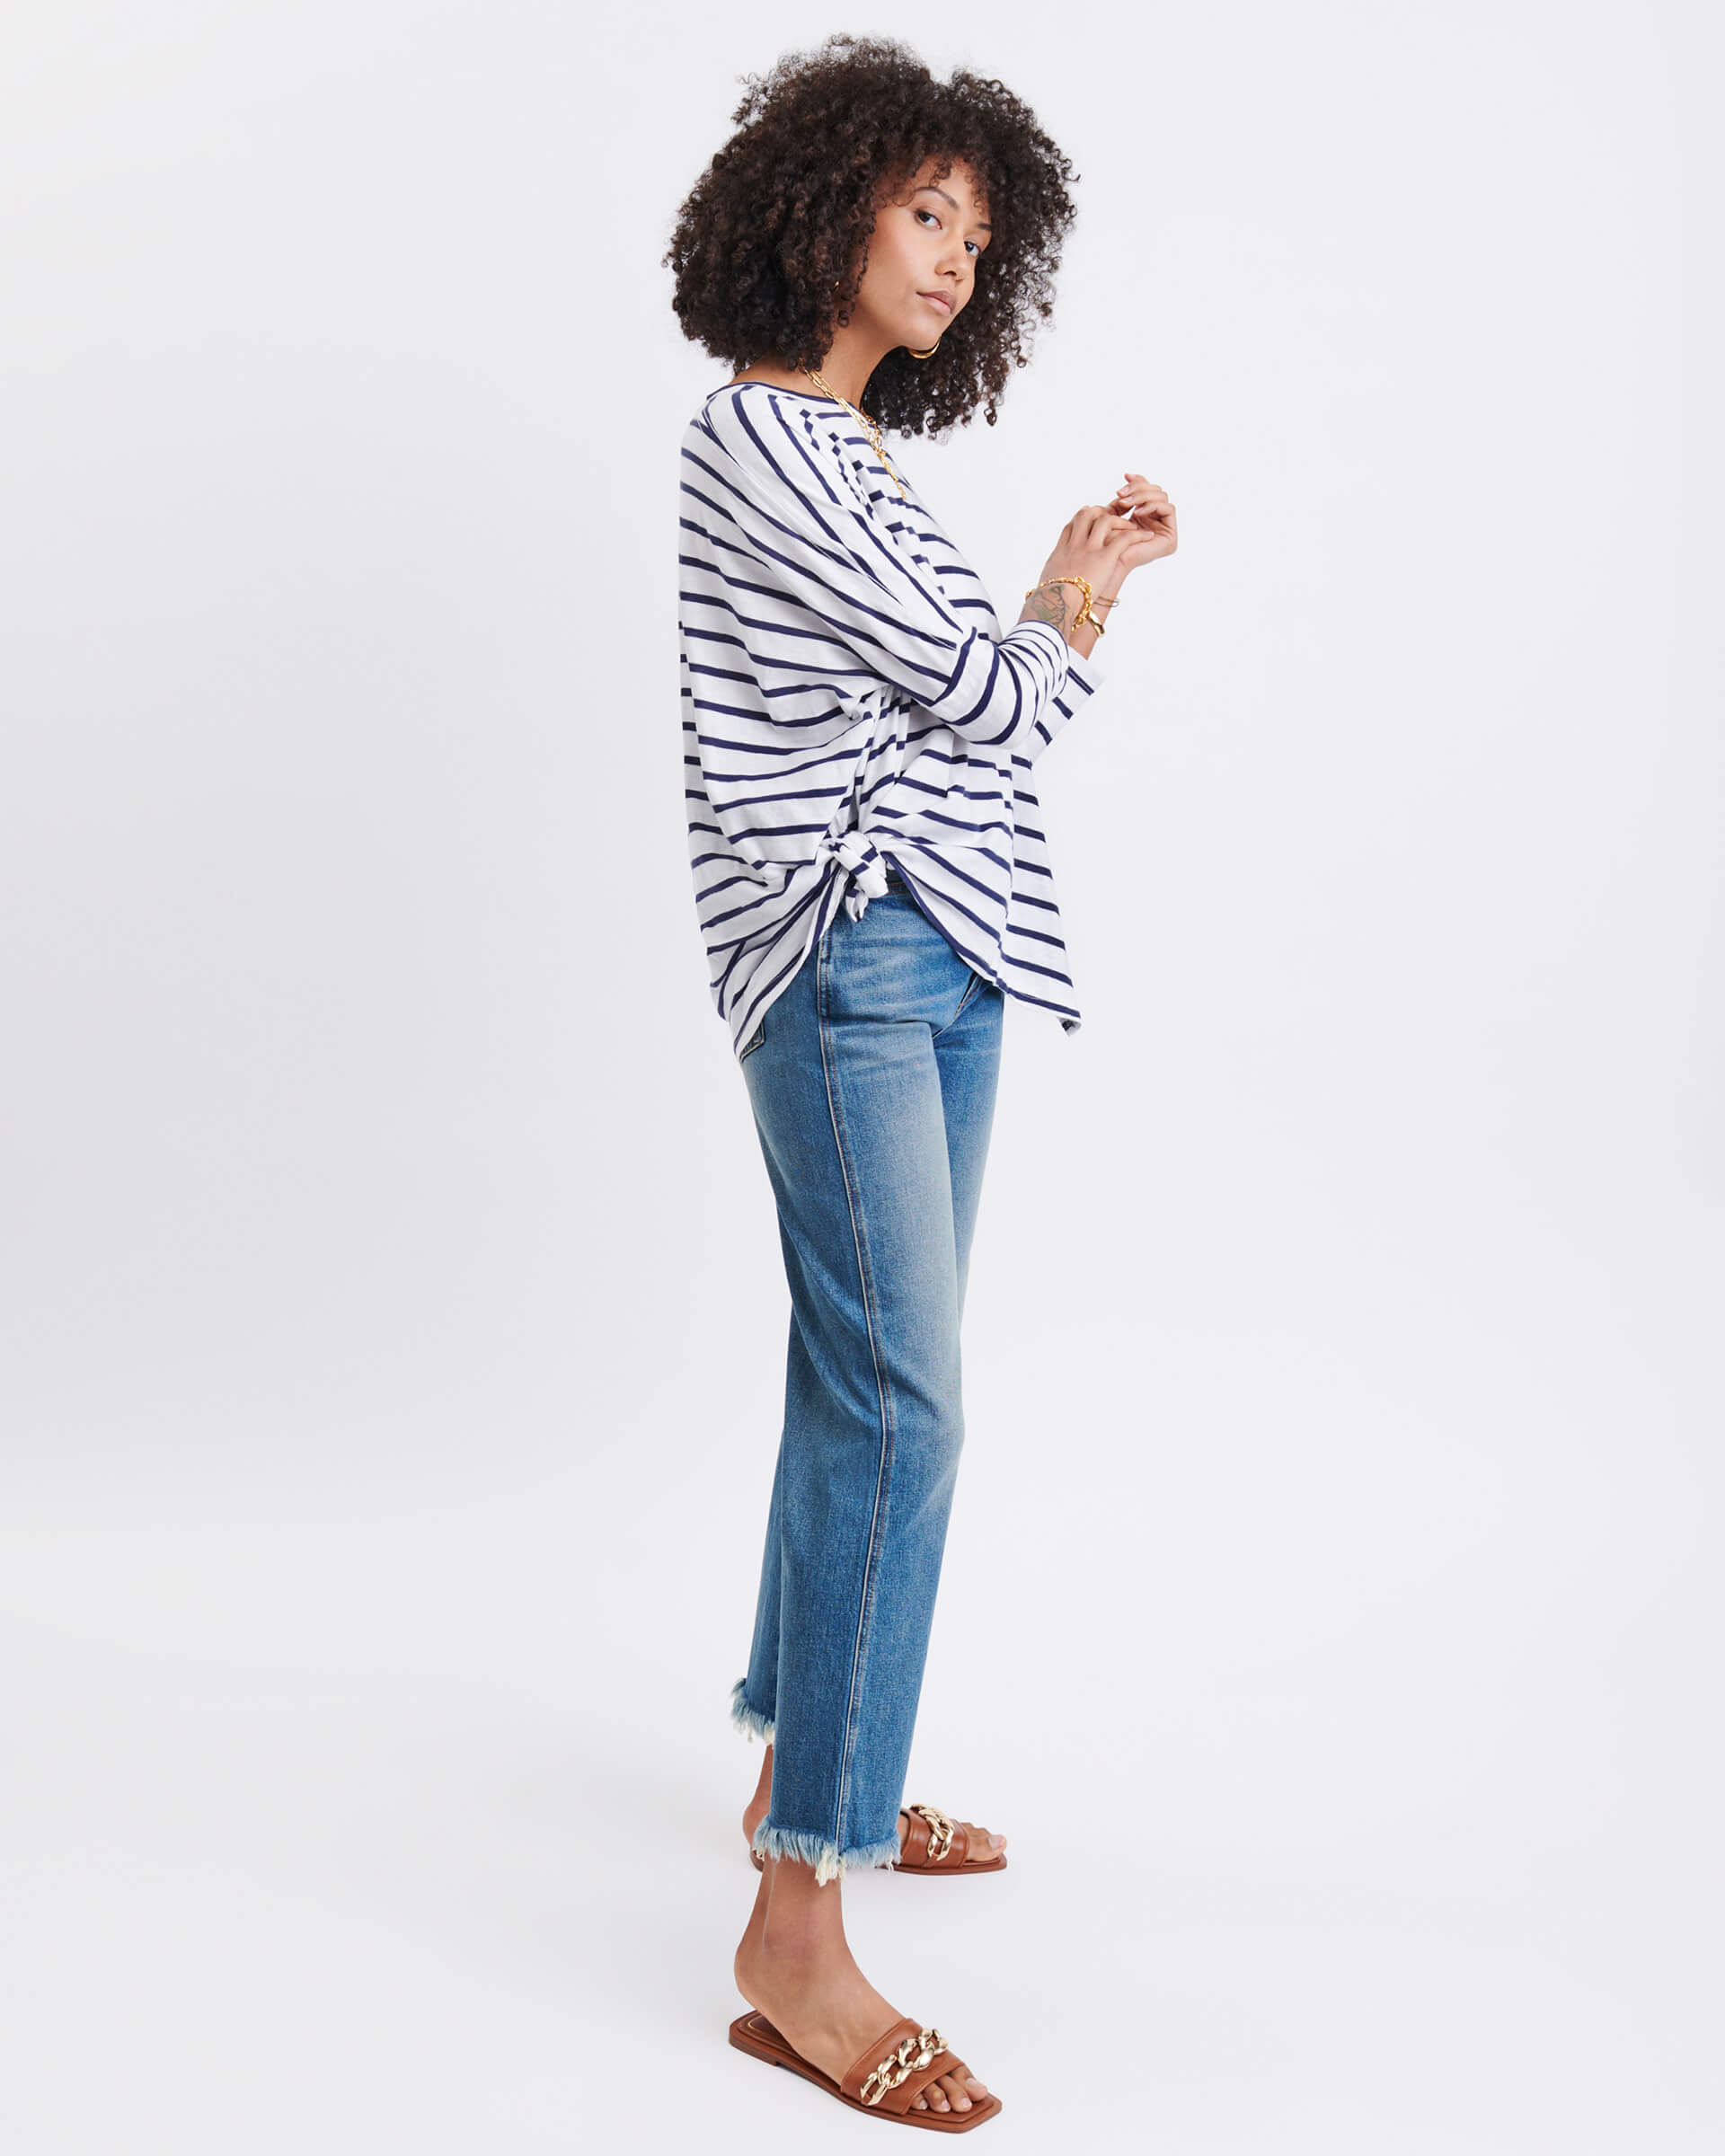 Women's One Size Tee in Navy Stripes Side View